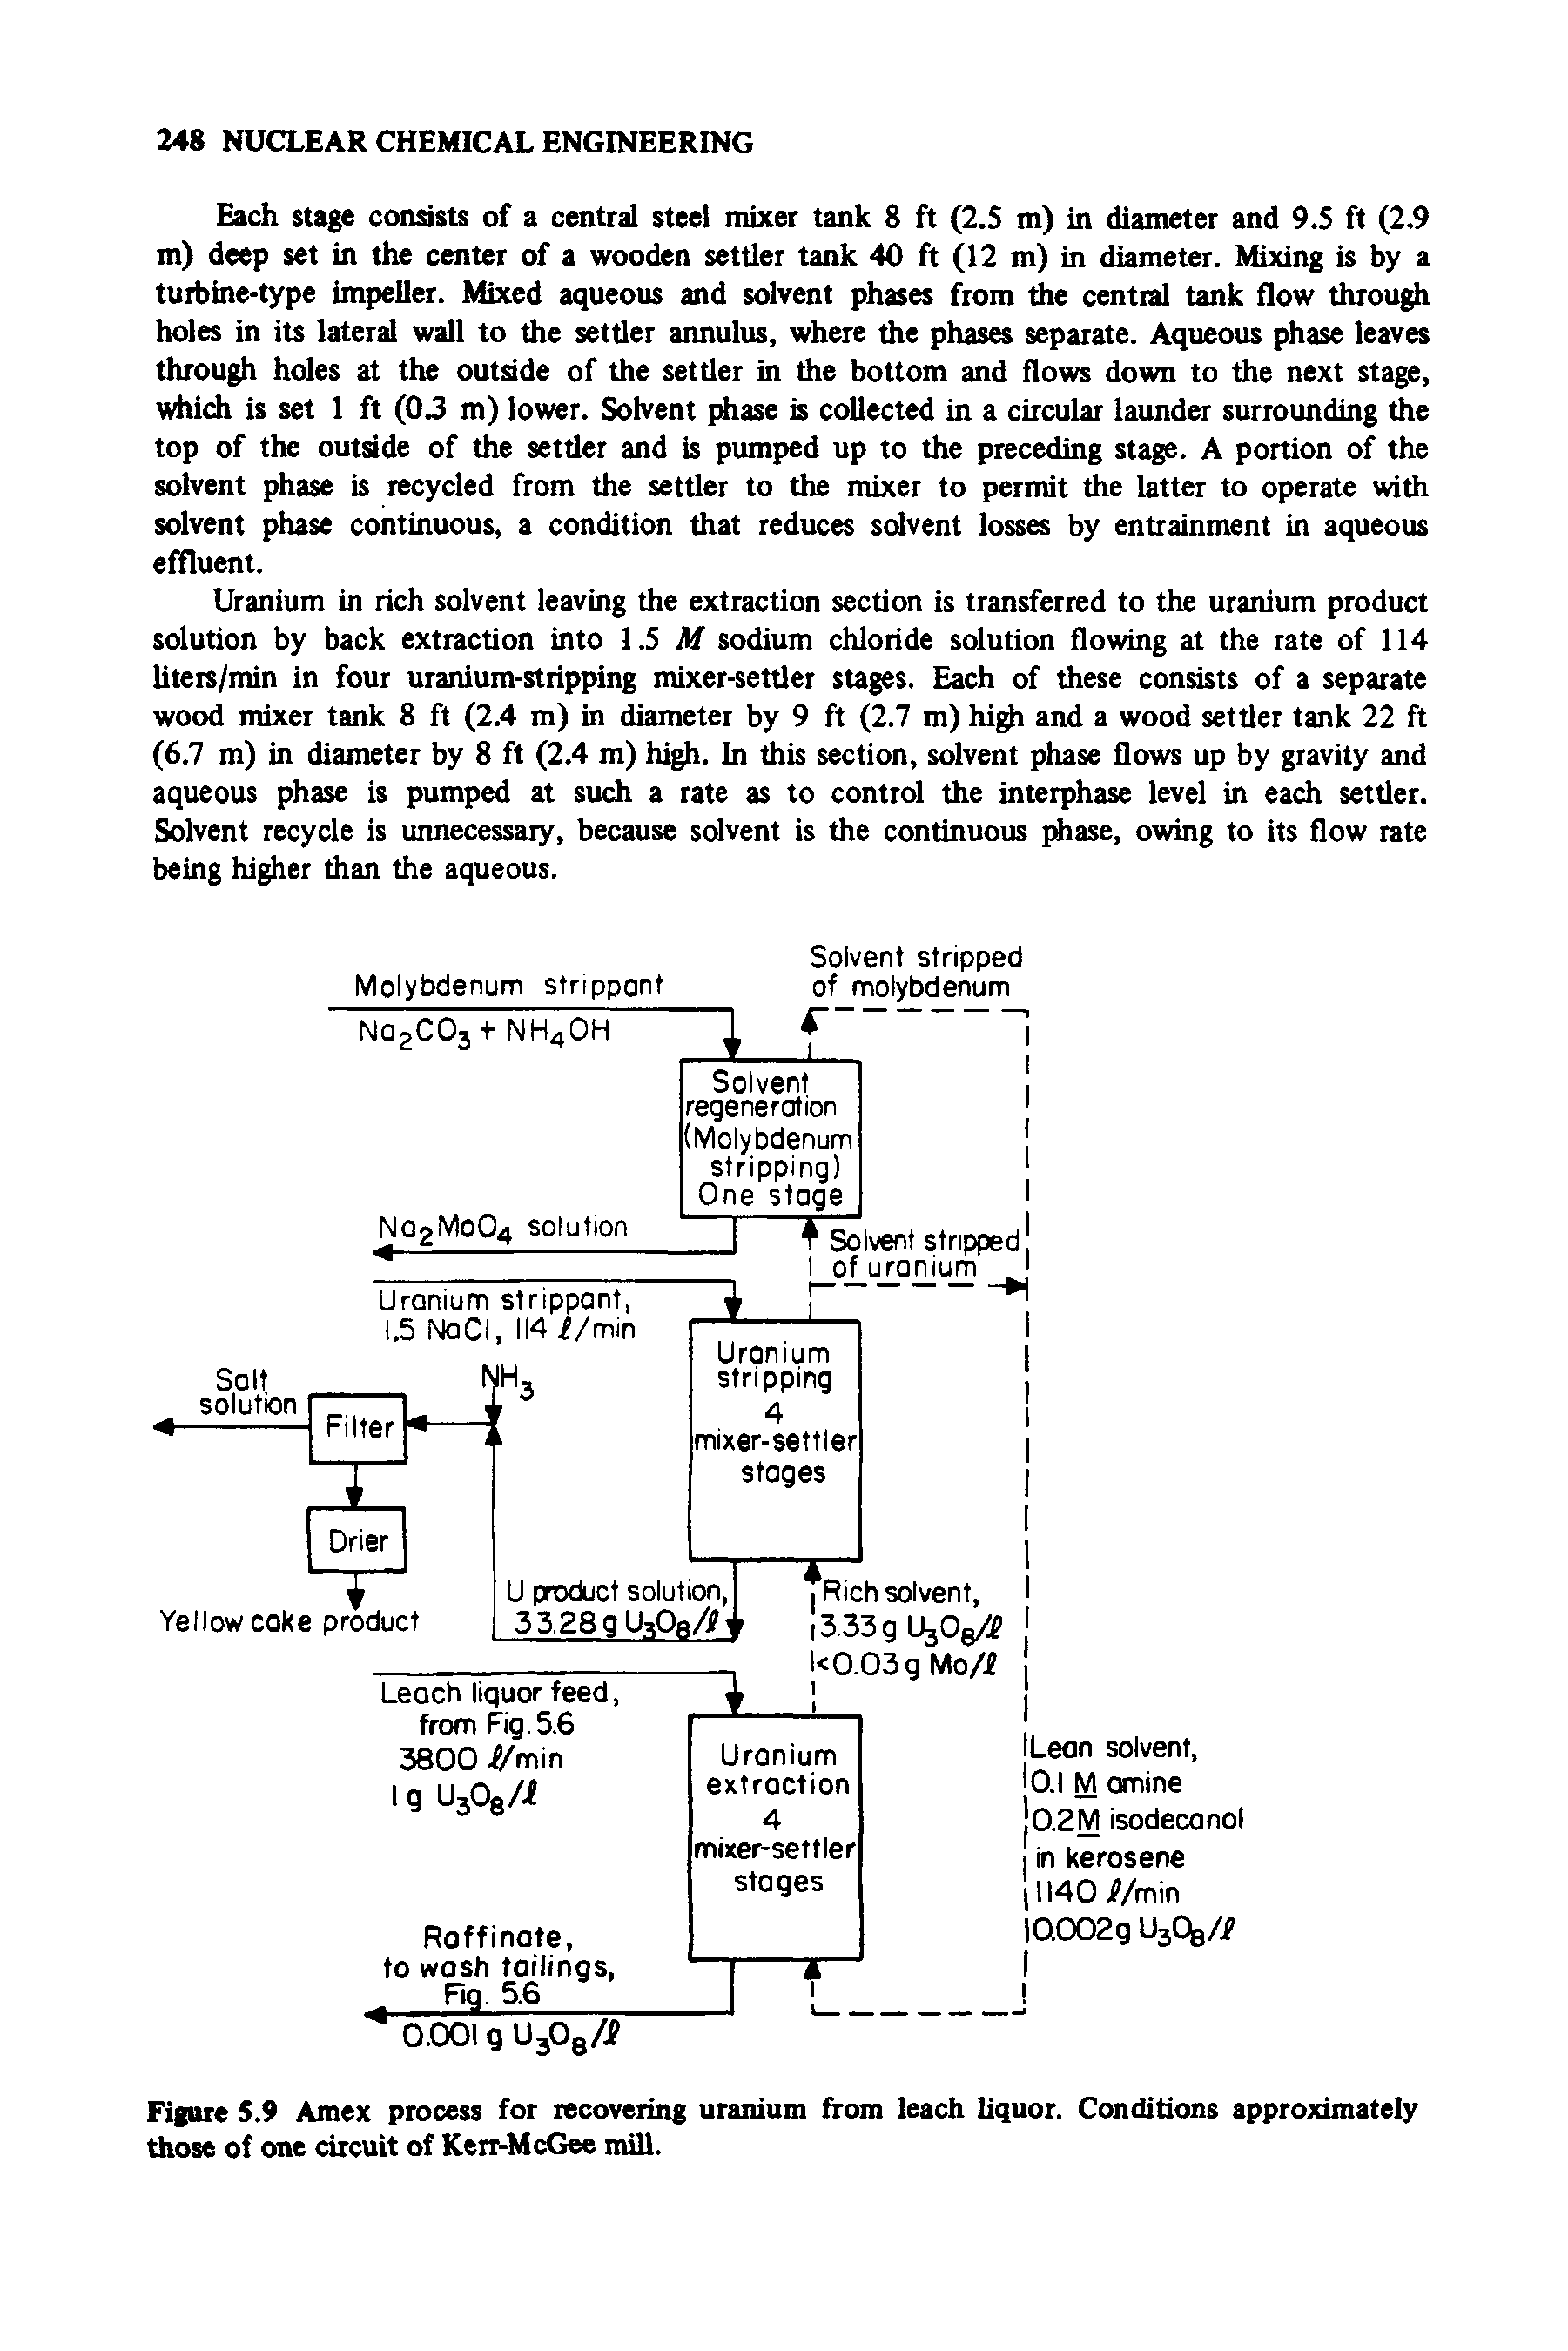 Figure 5.9 Amex process for recovering uranium from leach liquor. Conditions approximately those of one circuit of Kerr-McGee mill.